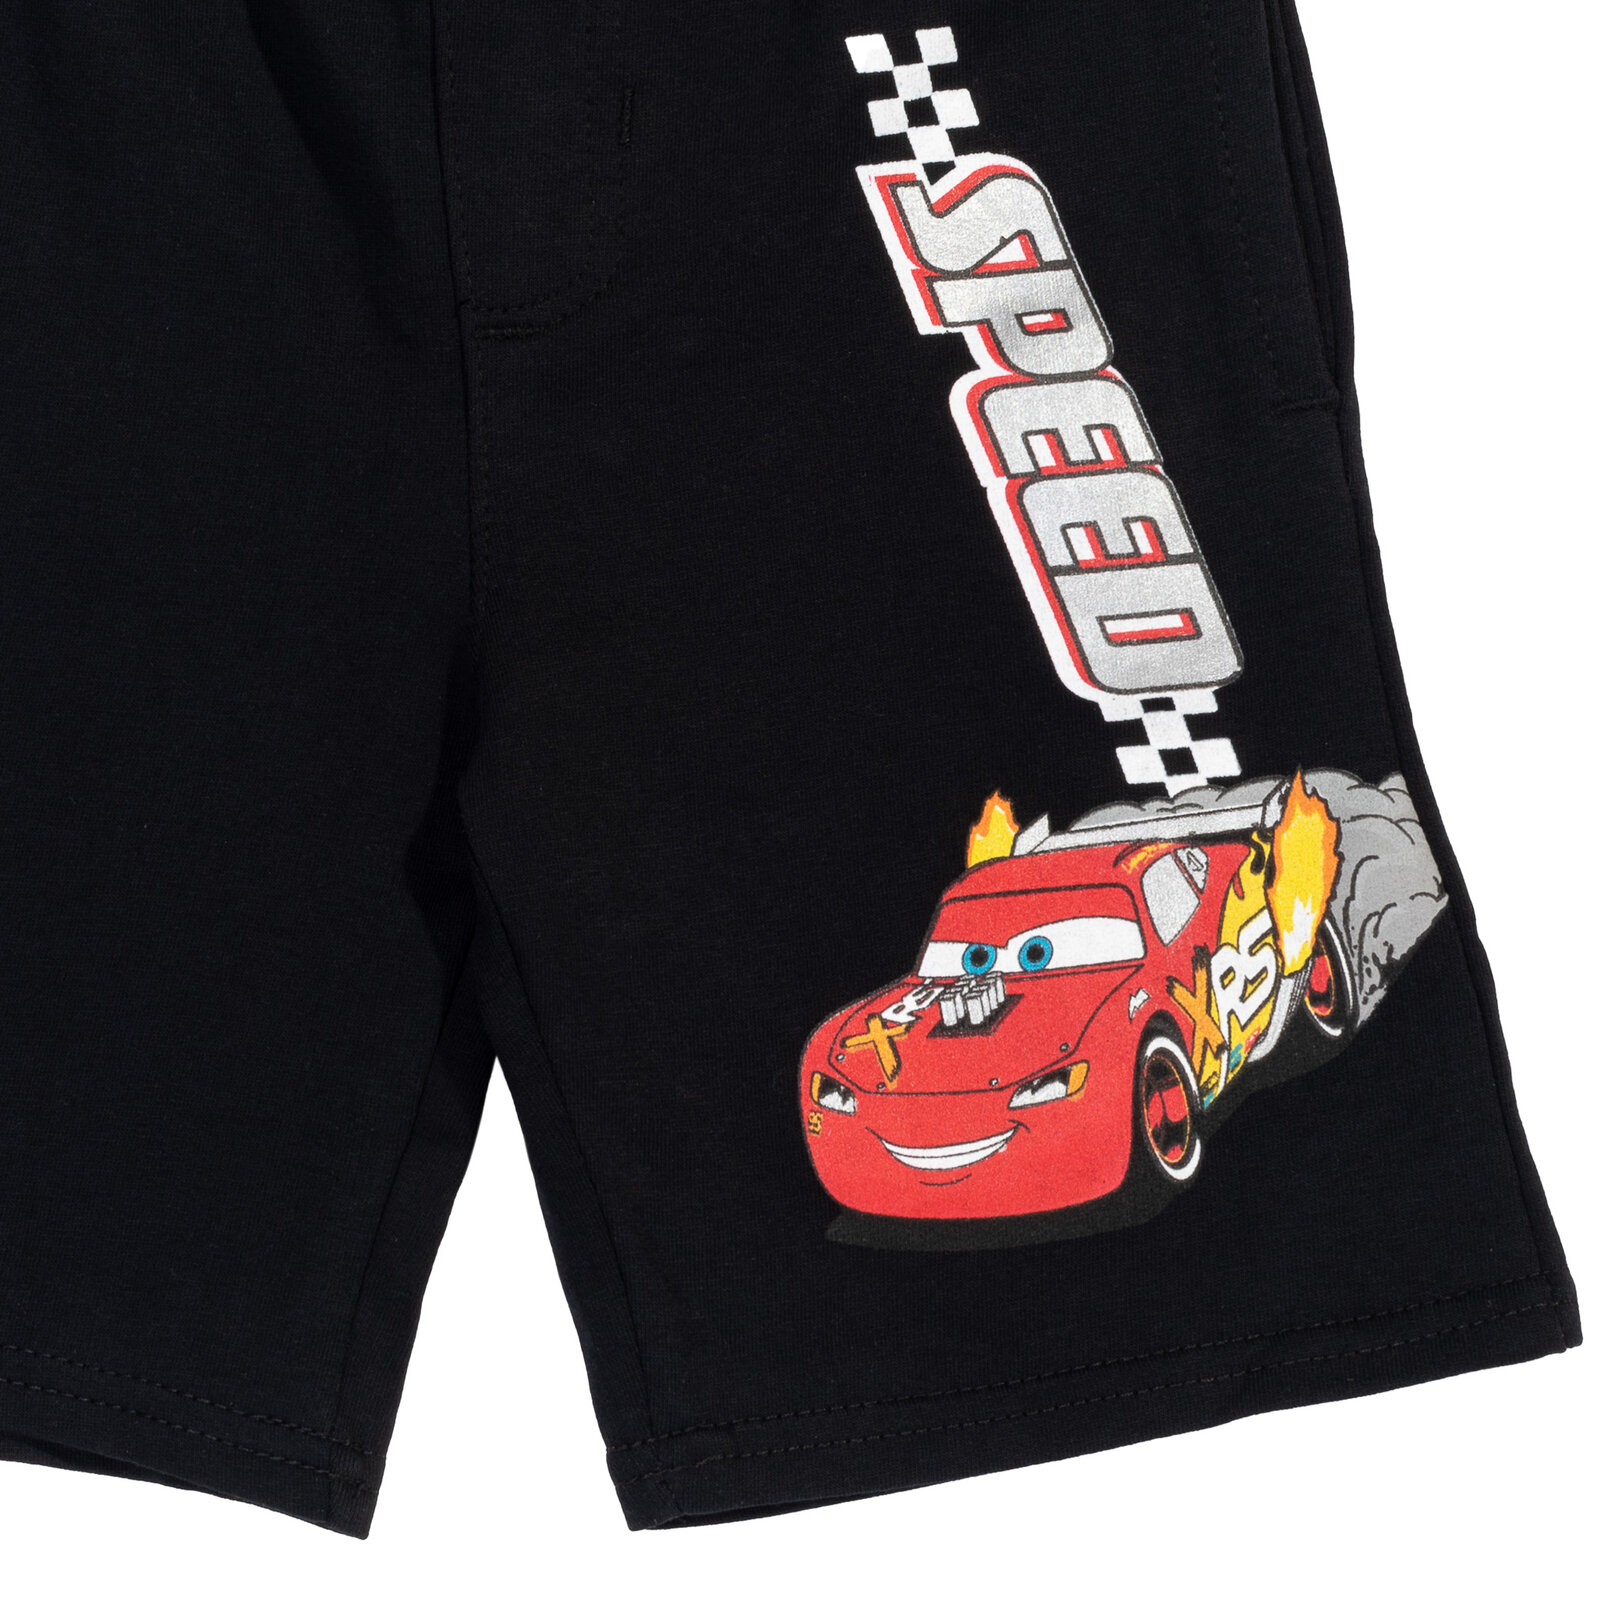 Disney Pixar Cars Lightning McQueen Toddler Boys French Terry 2 Pack Shorts Toddler to Little Kid - image 5 of 5